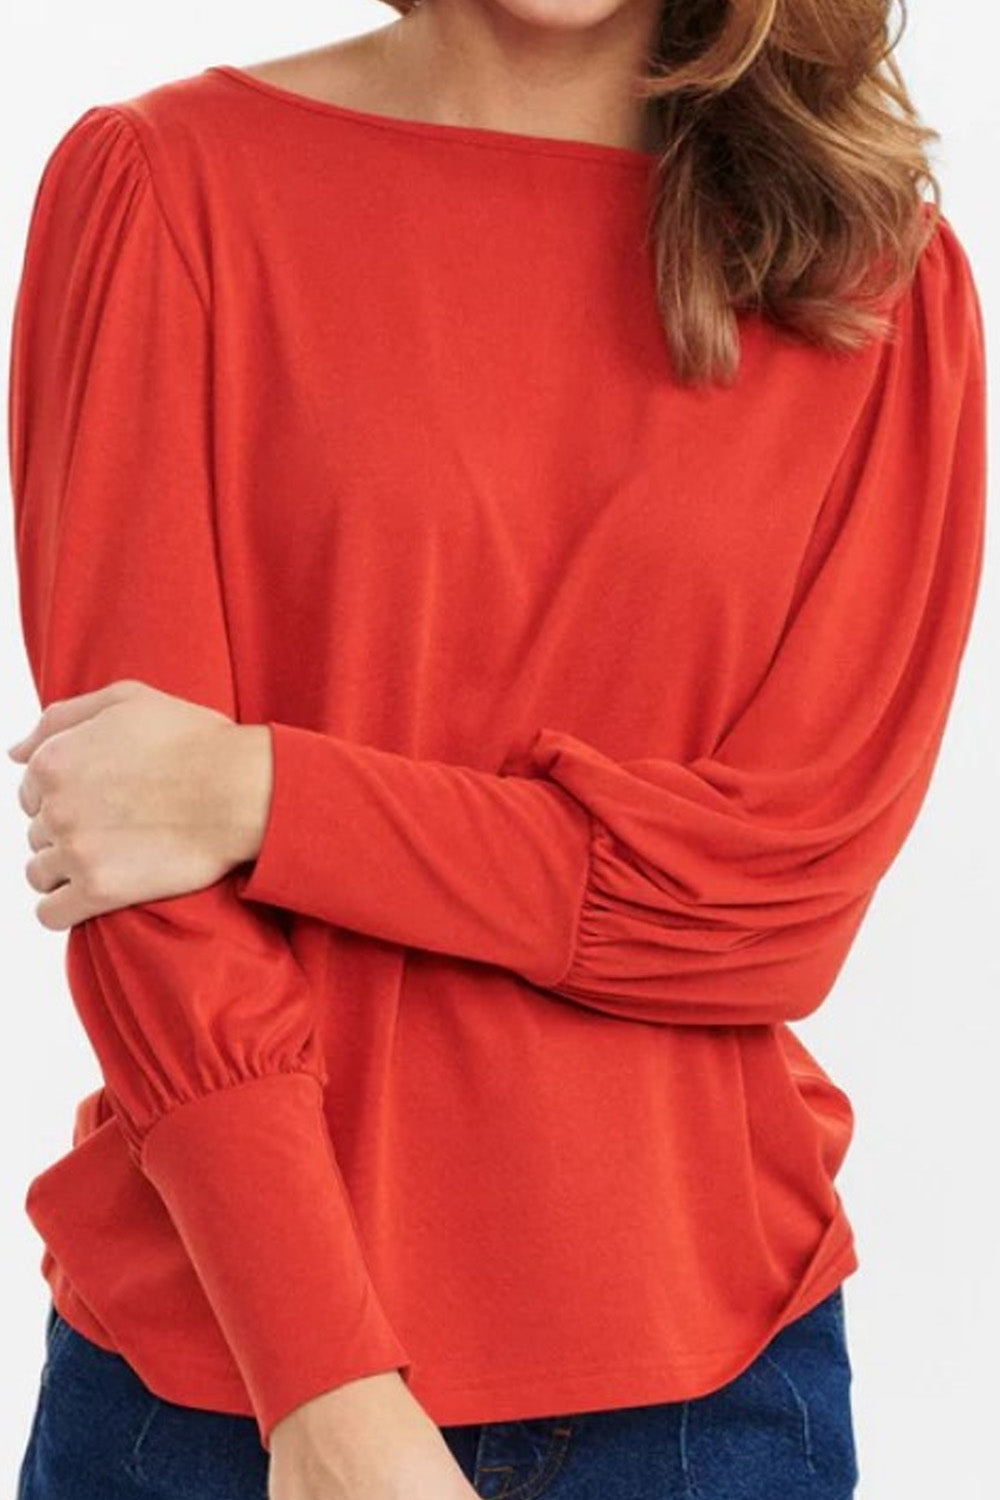 Mellifluous Red Top